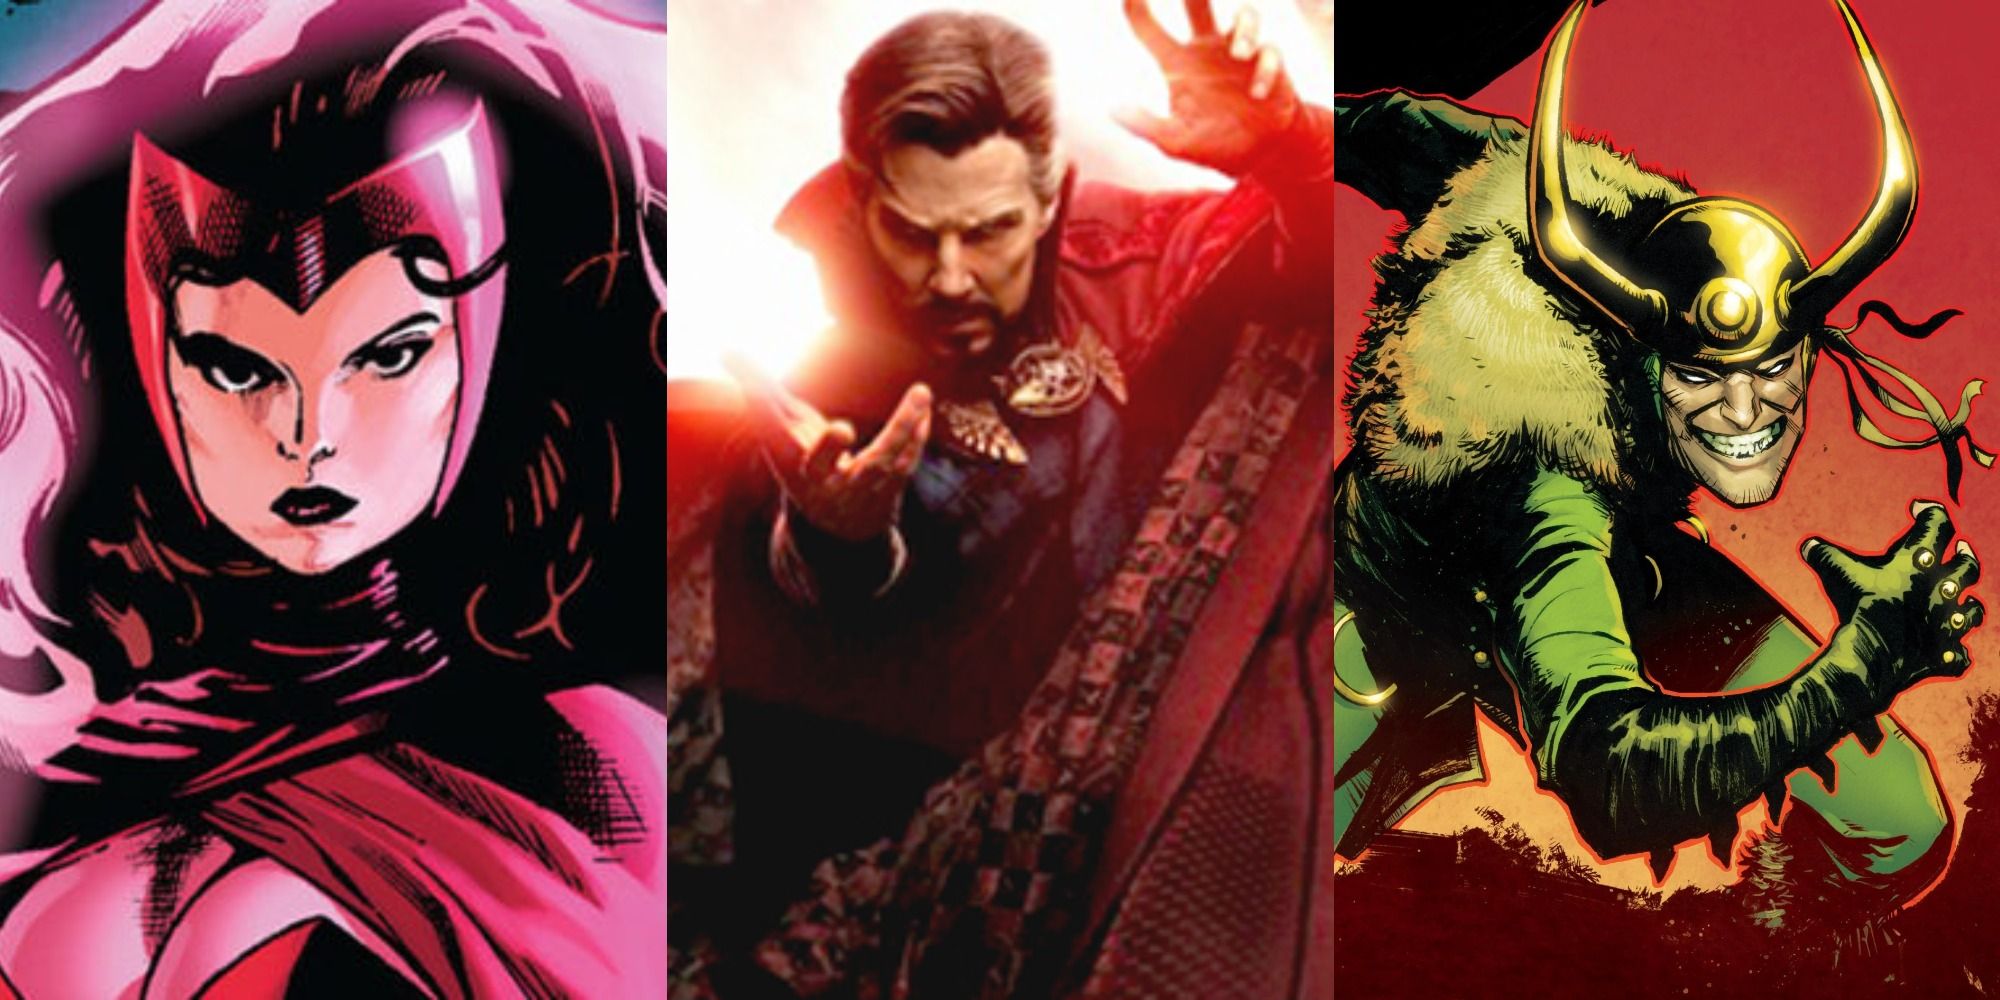 Split image of Scarlet Witch and Loki from Marvel Comics and Doctor Strange from Doctor Strange in the Multiverse of Madness.